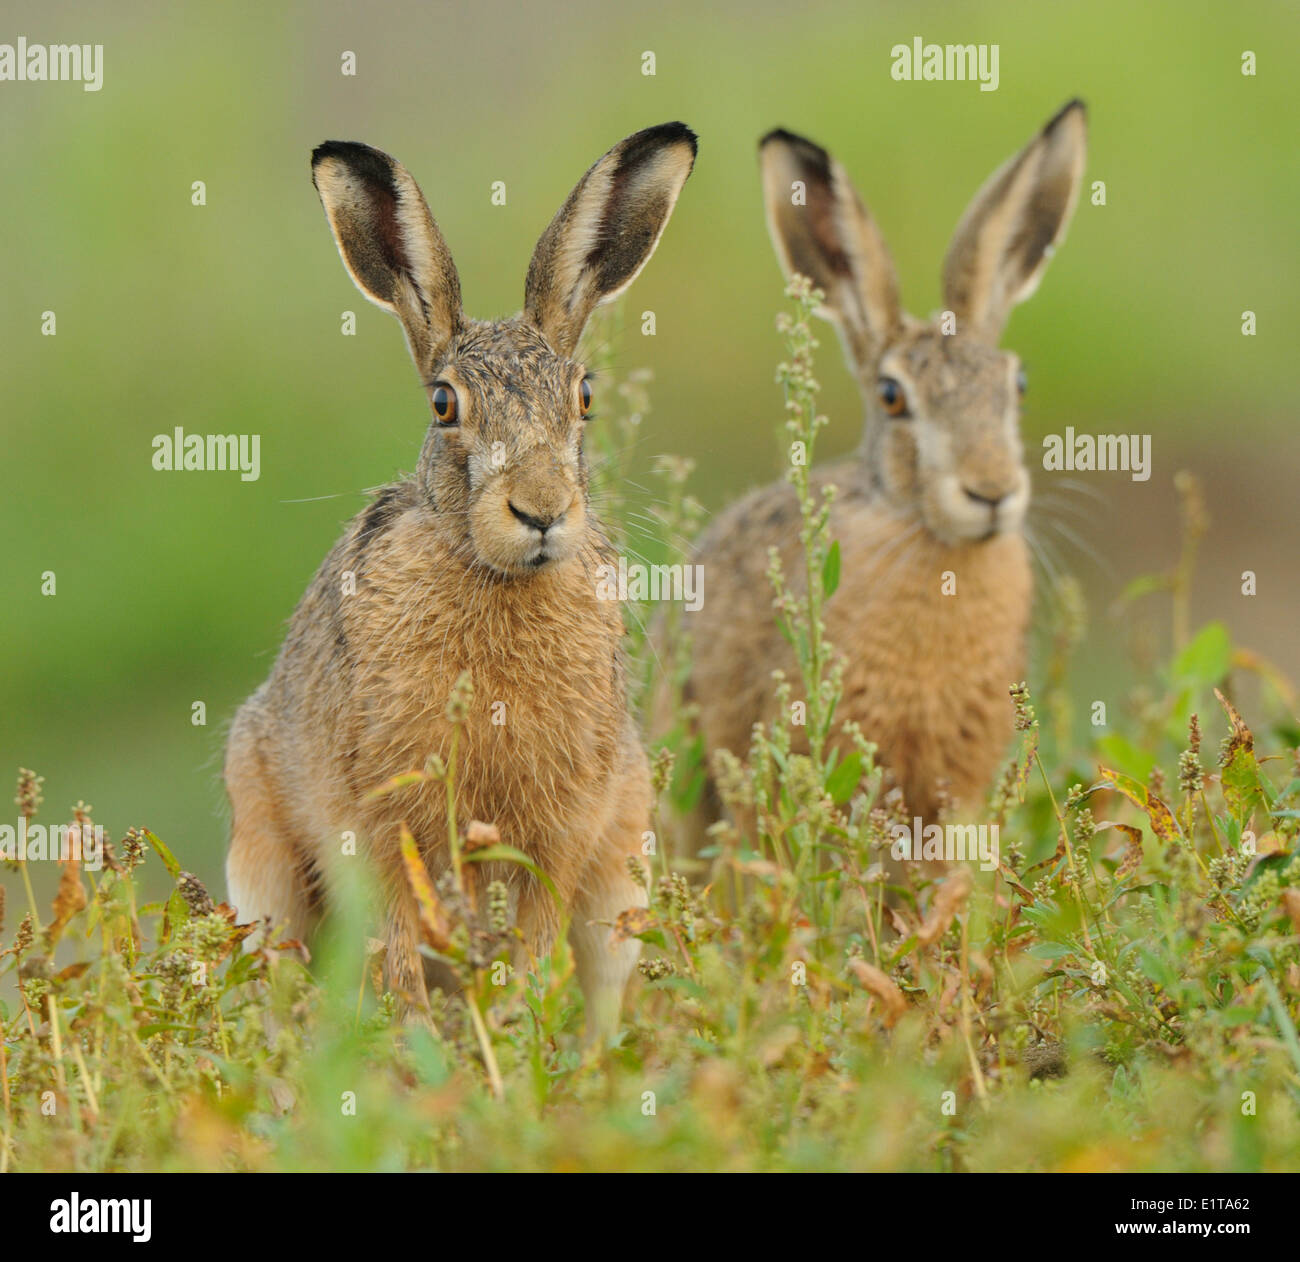 Two Hares standing side by side Stock Photo